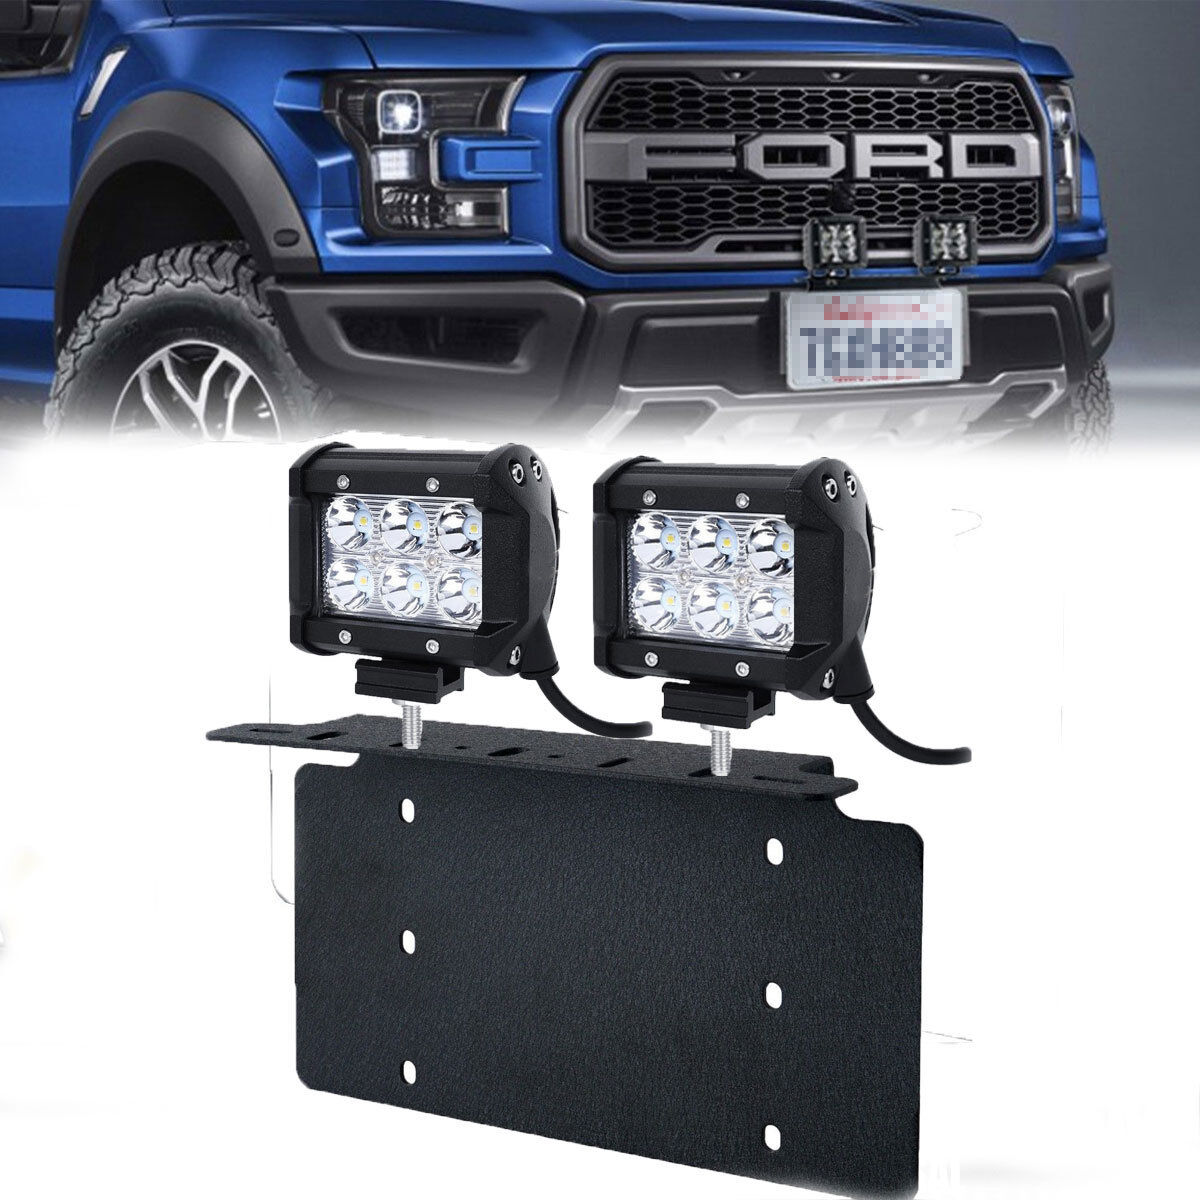 For Ford Truck Car Pair 18W LED Light Bar USA Front License Plate Mount Bracket